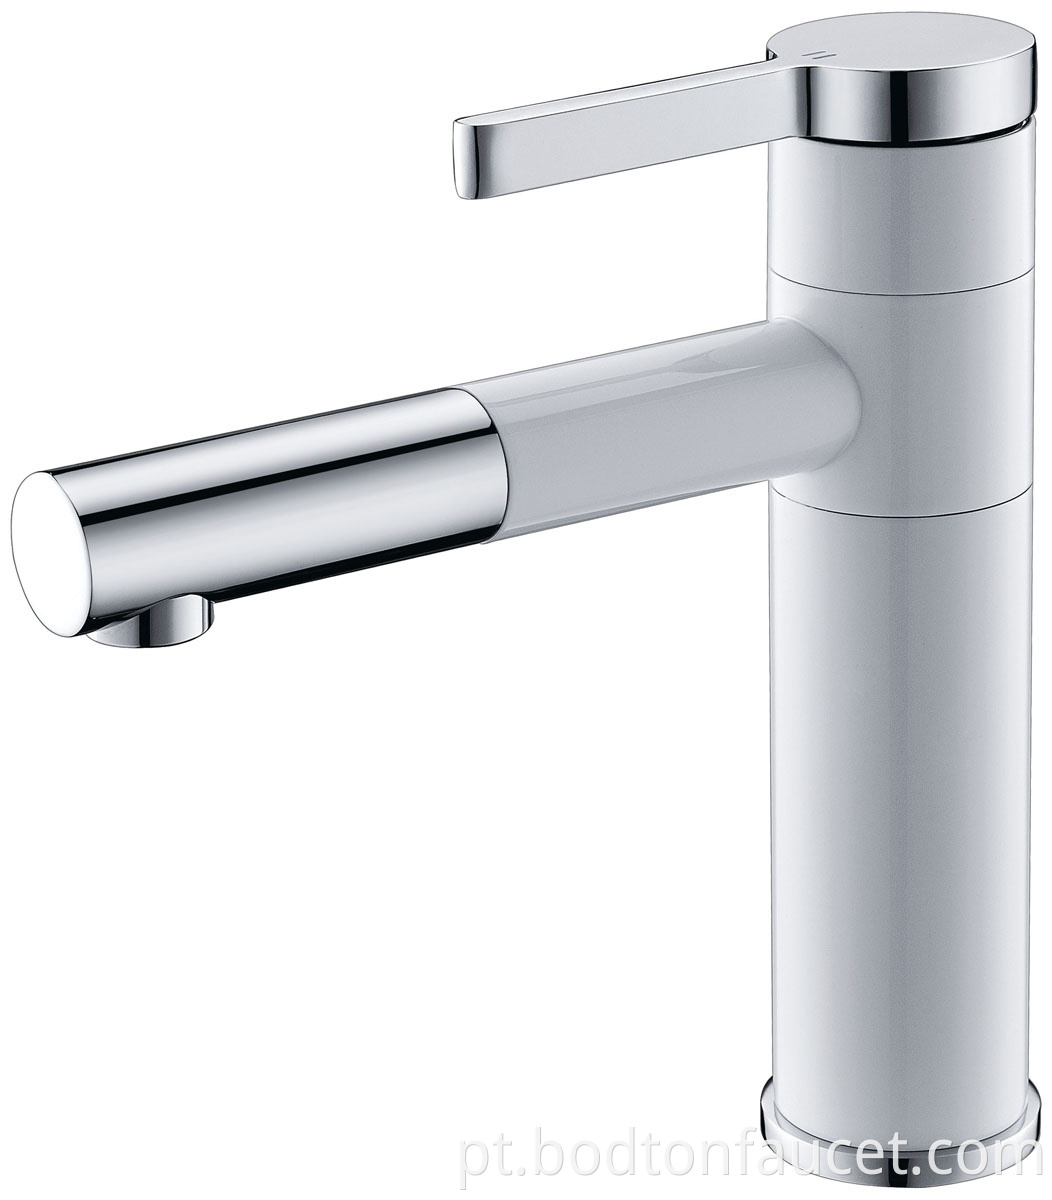 Hotel basin faucet with handle